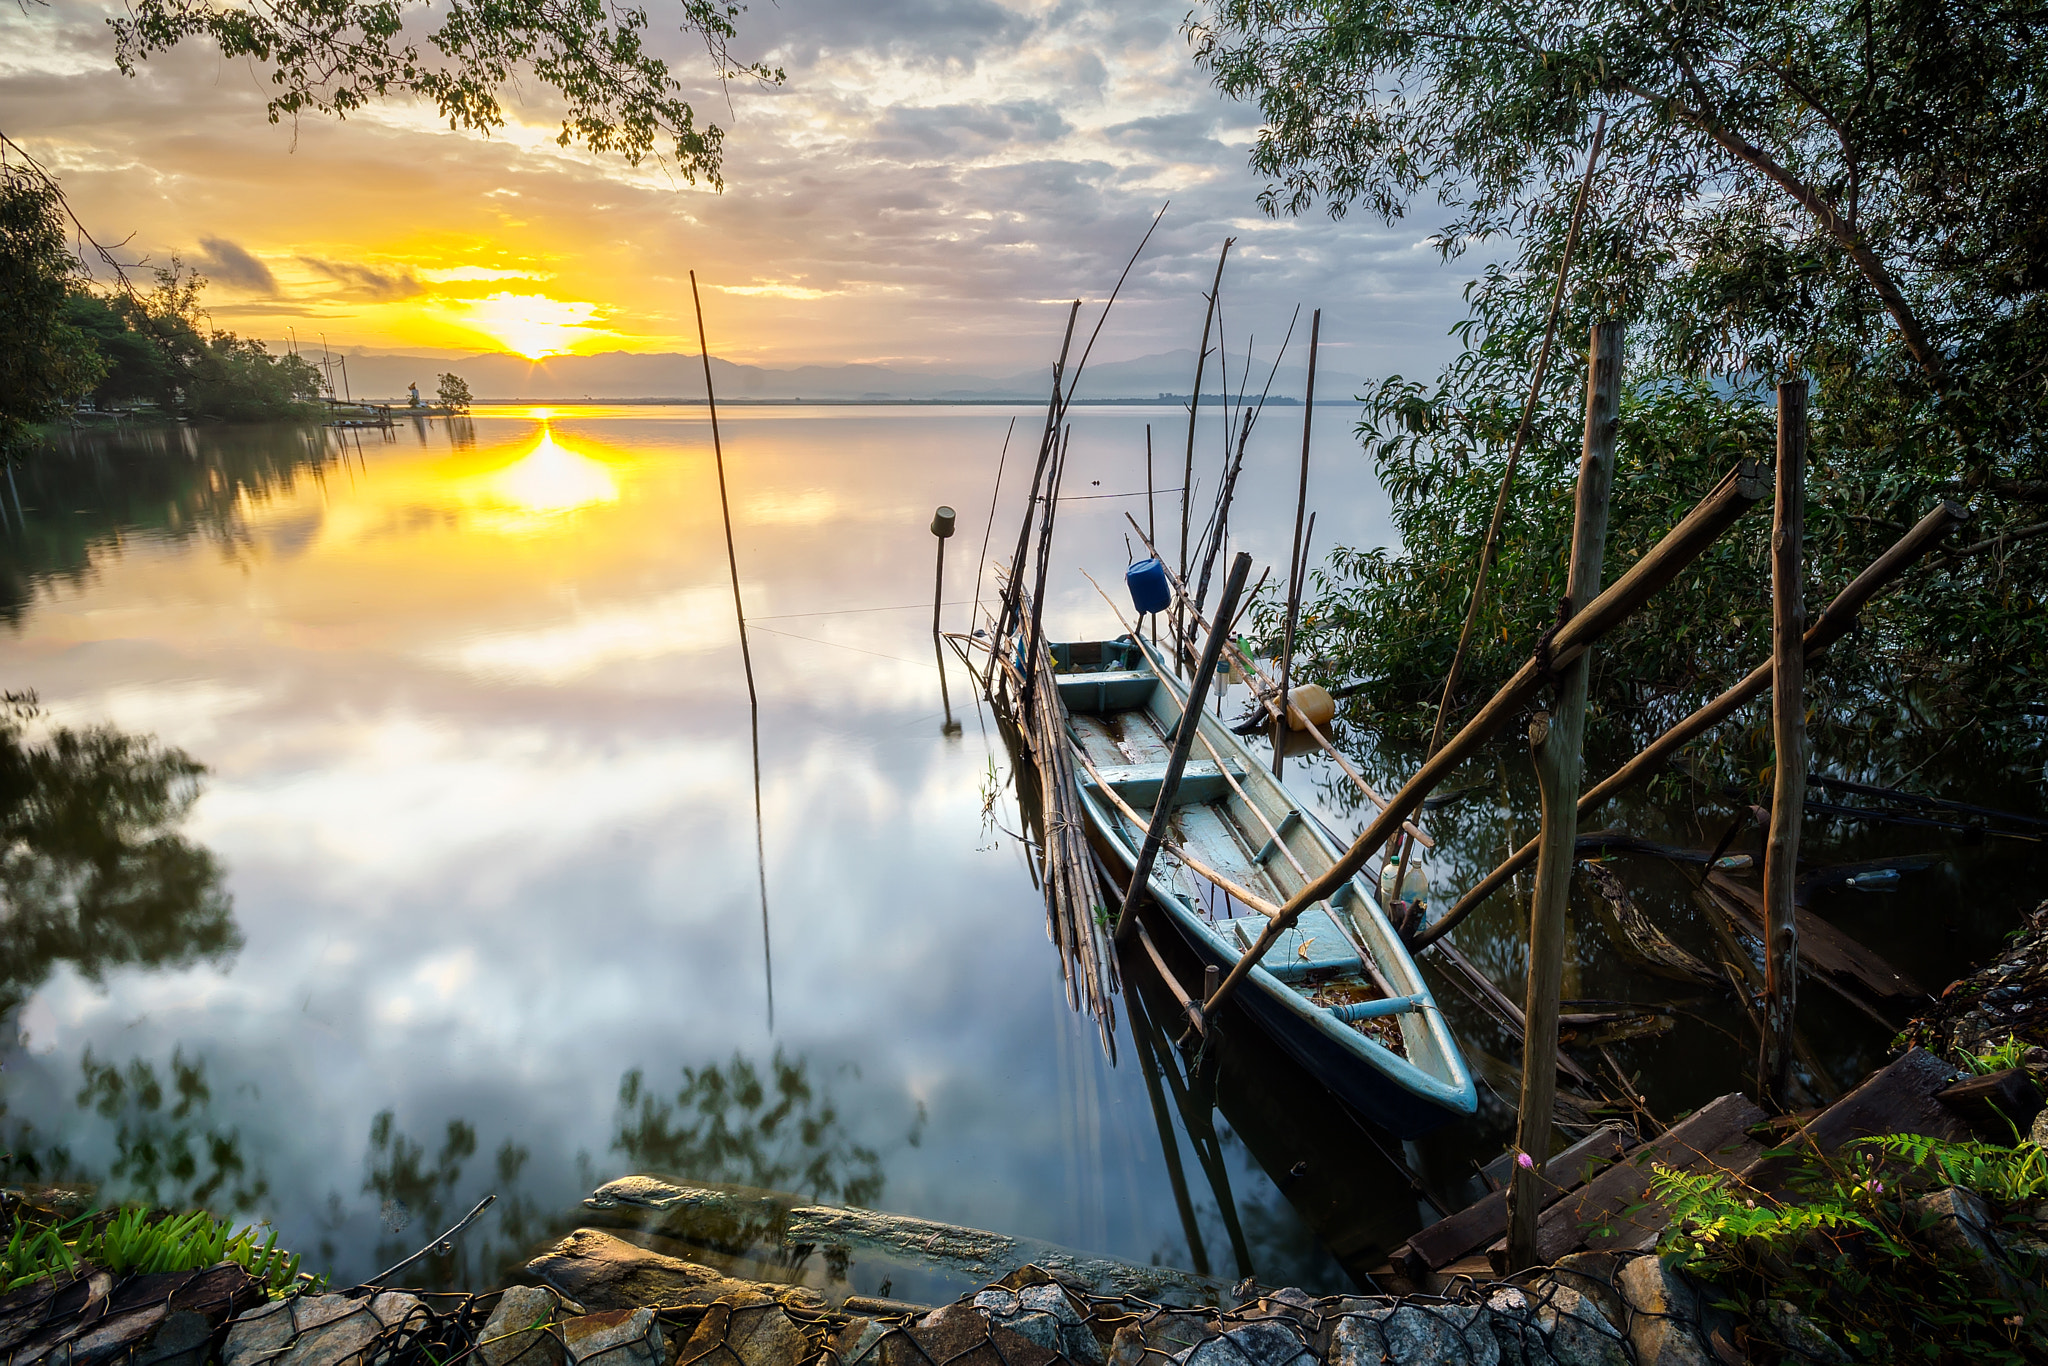 Sony a6000 sample photo. The fisherman boat tied at the lake side with the golden sunrise reflection over the calm water photography